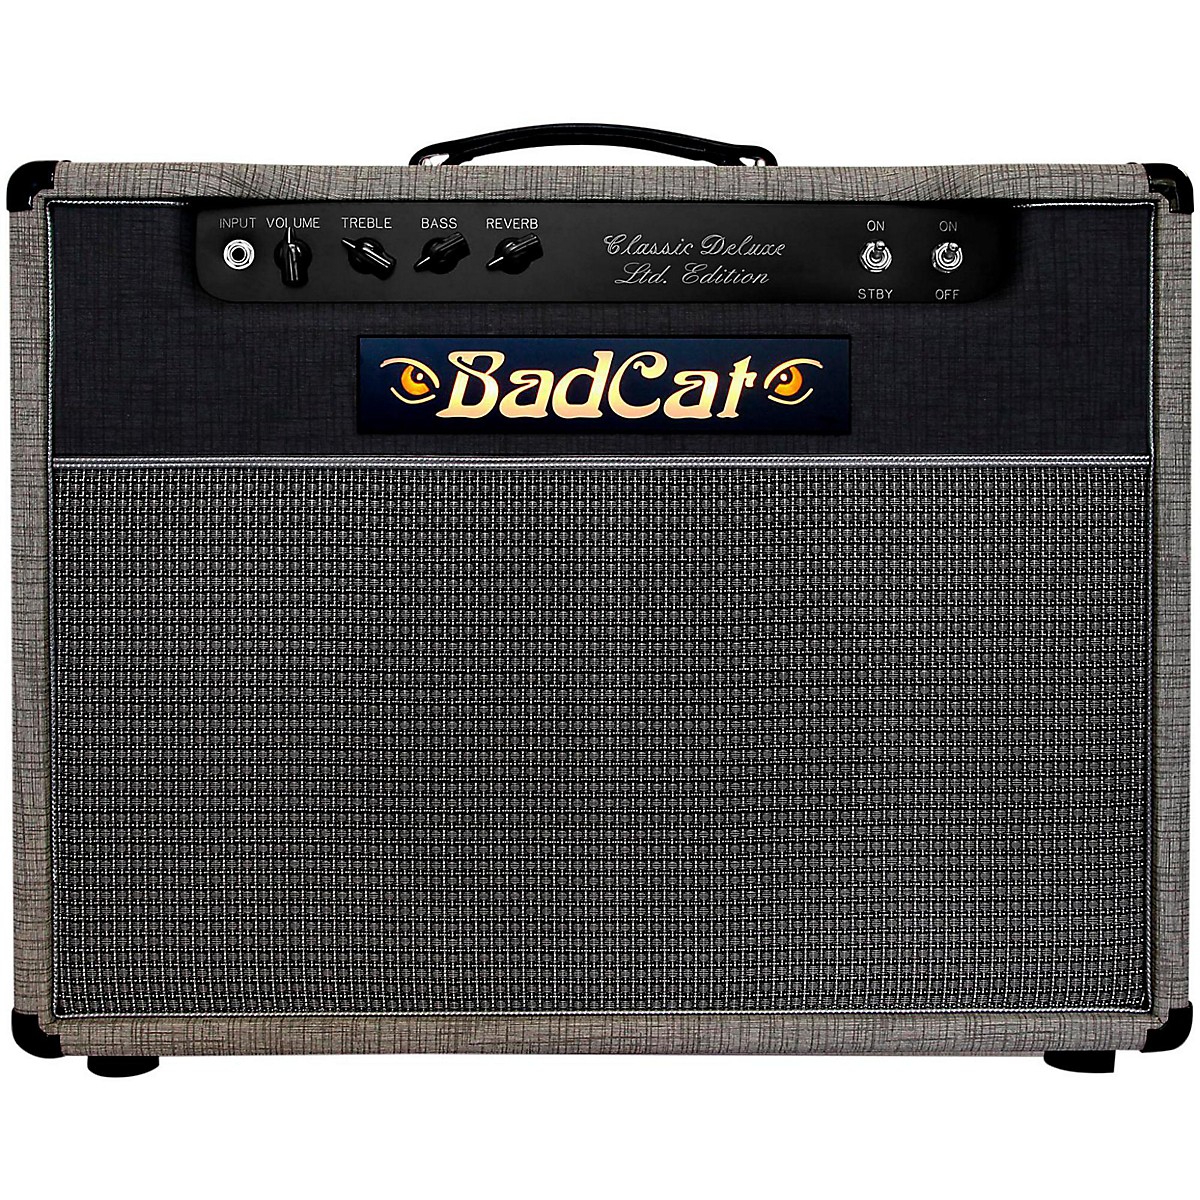 Bad Cat Limited Edition Classic Deluxe 22W 1x12 Guitar ...